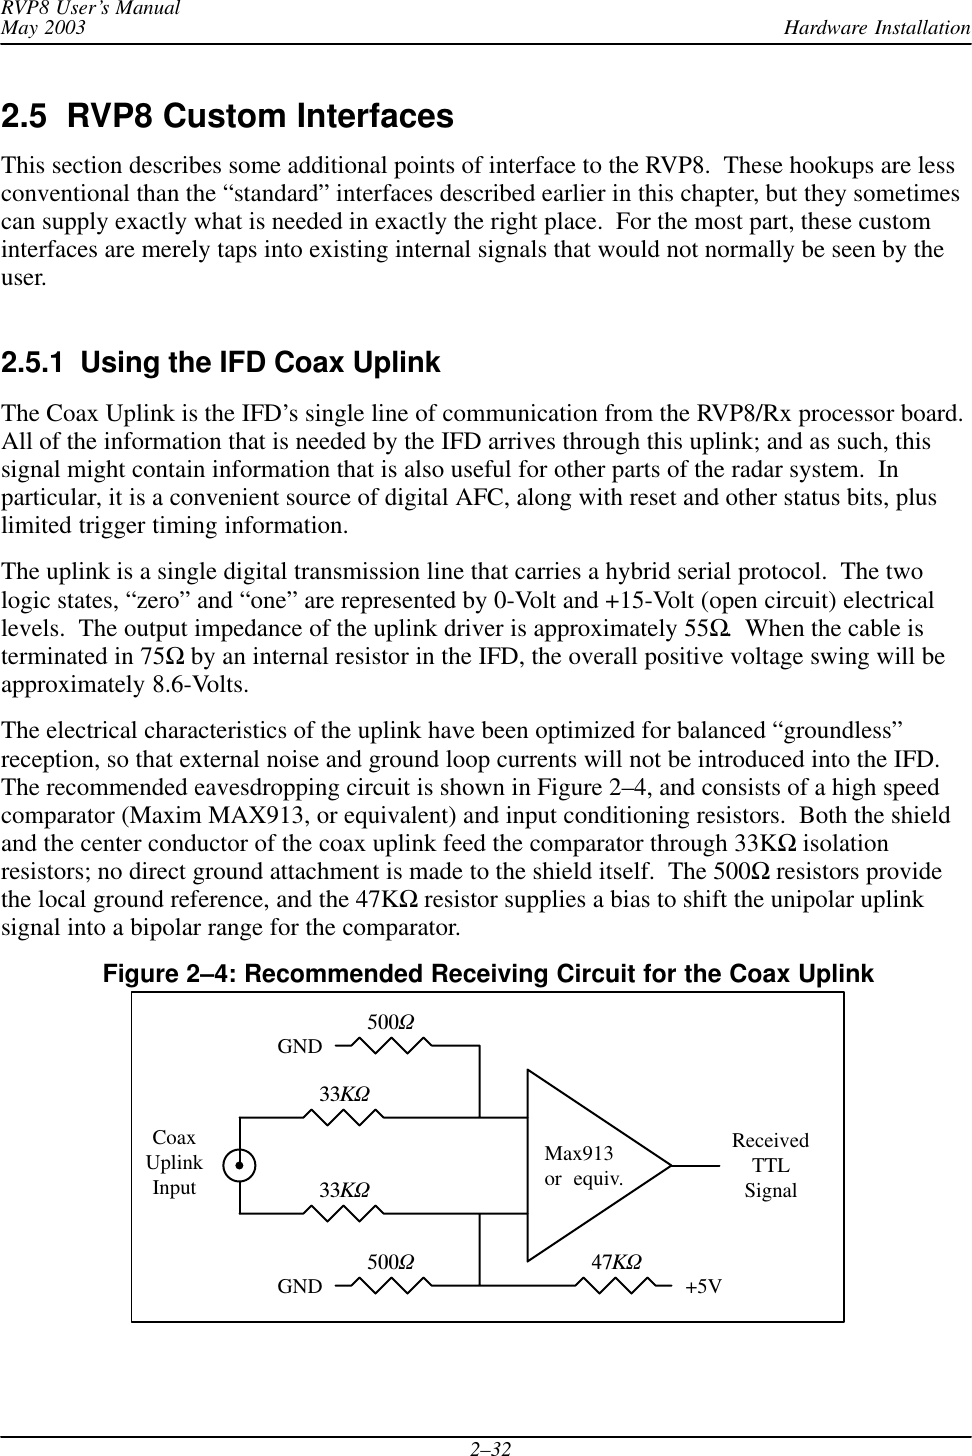 Hardware InstallationRVP8 User’s ManualMay 20032–322.5  RVP8 Custom InterfacesThis section describes some additional points of interface to the RVP8.  These hookups are lessconventional than the “standard” interfaces described earlier in this chapter, but they sometimescan supply exactly what is needed in exactly the right place.  For the most part, these custominterfaces are merely taps into existing internal signals that would not normally be seen by theuser.2.5.1  Using the IFD Coax UplinkThe Coax Uplink is the IFD’s single line of communication from the RVP8/Rx processor board.All of the information that is needed by the IFD arrives through this uplink; and as such, thissignal might contain information that is also useful for other parts of the radar system.  Inparticular, it is a convenient source of digital AFC, along with reset and other status bits, pluslimited trigger timing information.The uplink is a single digital transmission line that carries a hybrid serial protocol.  The twologic states, “zero” and “one” are represented by 0-Volt and +15-Volt (open circuit) electricallevels.  The output impedance of the uplink driver is approximately 55Ω.  When the cable isterminated in 75Ω by an internal resistor in the IFD, the overall positive voltage swing will beapproximately 8.6-Volts.The electrical characteristics of the uplink have been optimized for balanced “groundless”reception, so that external noise and ground loop currents will not be introduced into the IFD.The recommended eavesdropping circuit is shown in Figure 2–4, and consists of a high speedcomparator (Maxim MAX913, or equivalent) and input conditioning resistors.  Both the shieldand the center conductor of the coax uplink feed the comparator through 33KΩ isolationresistors; no direct ground attachment is made to the shield itself.  The 500Ω resistors providethe local ground reference, and the 47KΩ resistor supplies a bias to shift the unipolar uplinksignal into a bipolar range for the comparator.Figure 2–4: Recommended Receiving Circuit for the Coax UplinkMax913or  equiv.33KW33KW500W500W47KWReceivedTTLSignal+5VGNDGNDCoaxUplinkInput